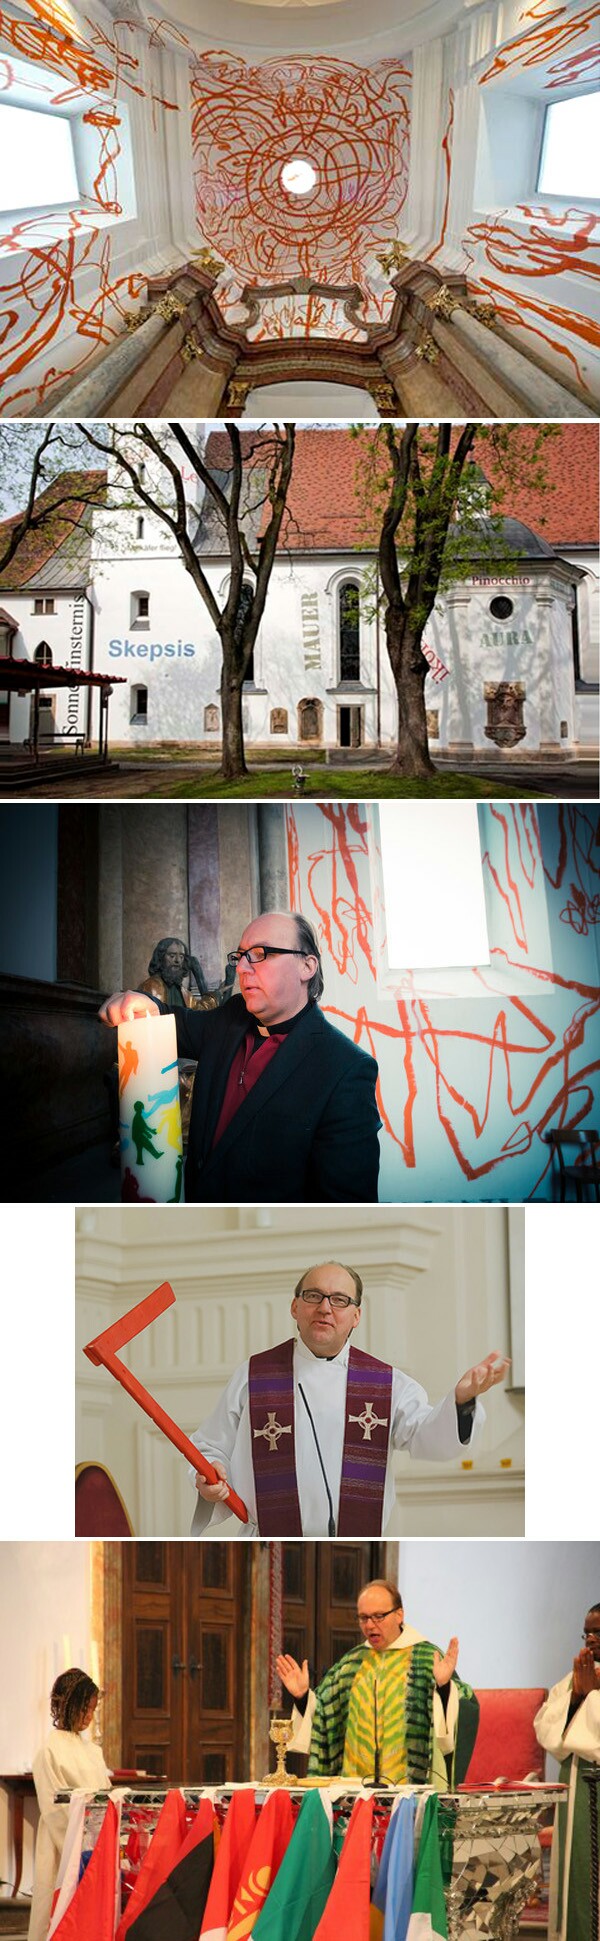 photo montage showing the graffiti art desecration of Saint Andra Church and modernist masses of bishop Glettler